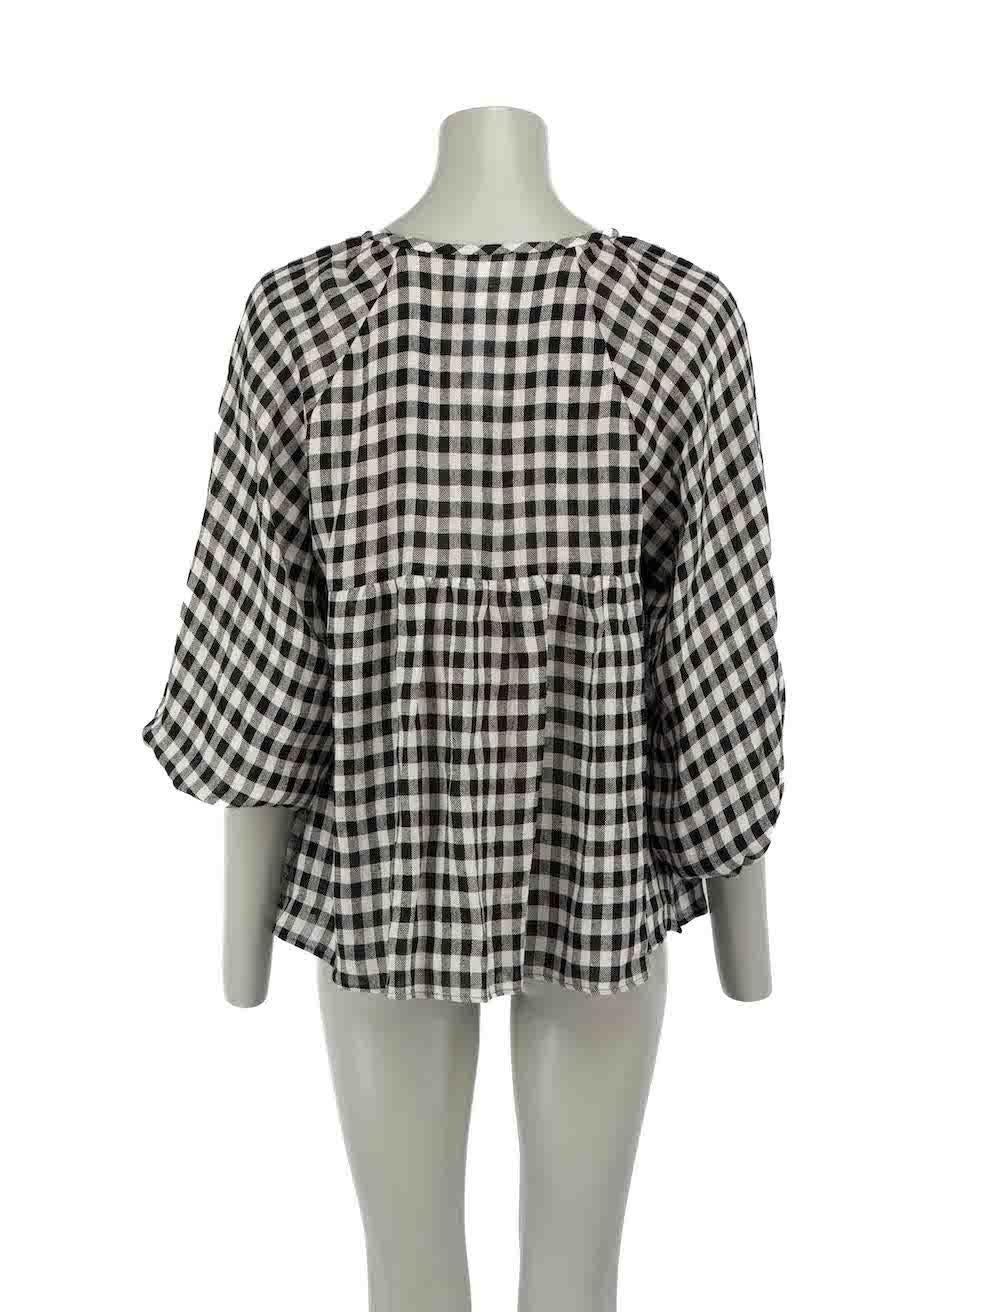 Max Mara Weekend Max Mara Black Gingham Top Size XS In Good Condition For Sale In London, GB